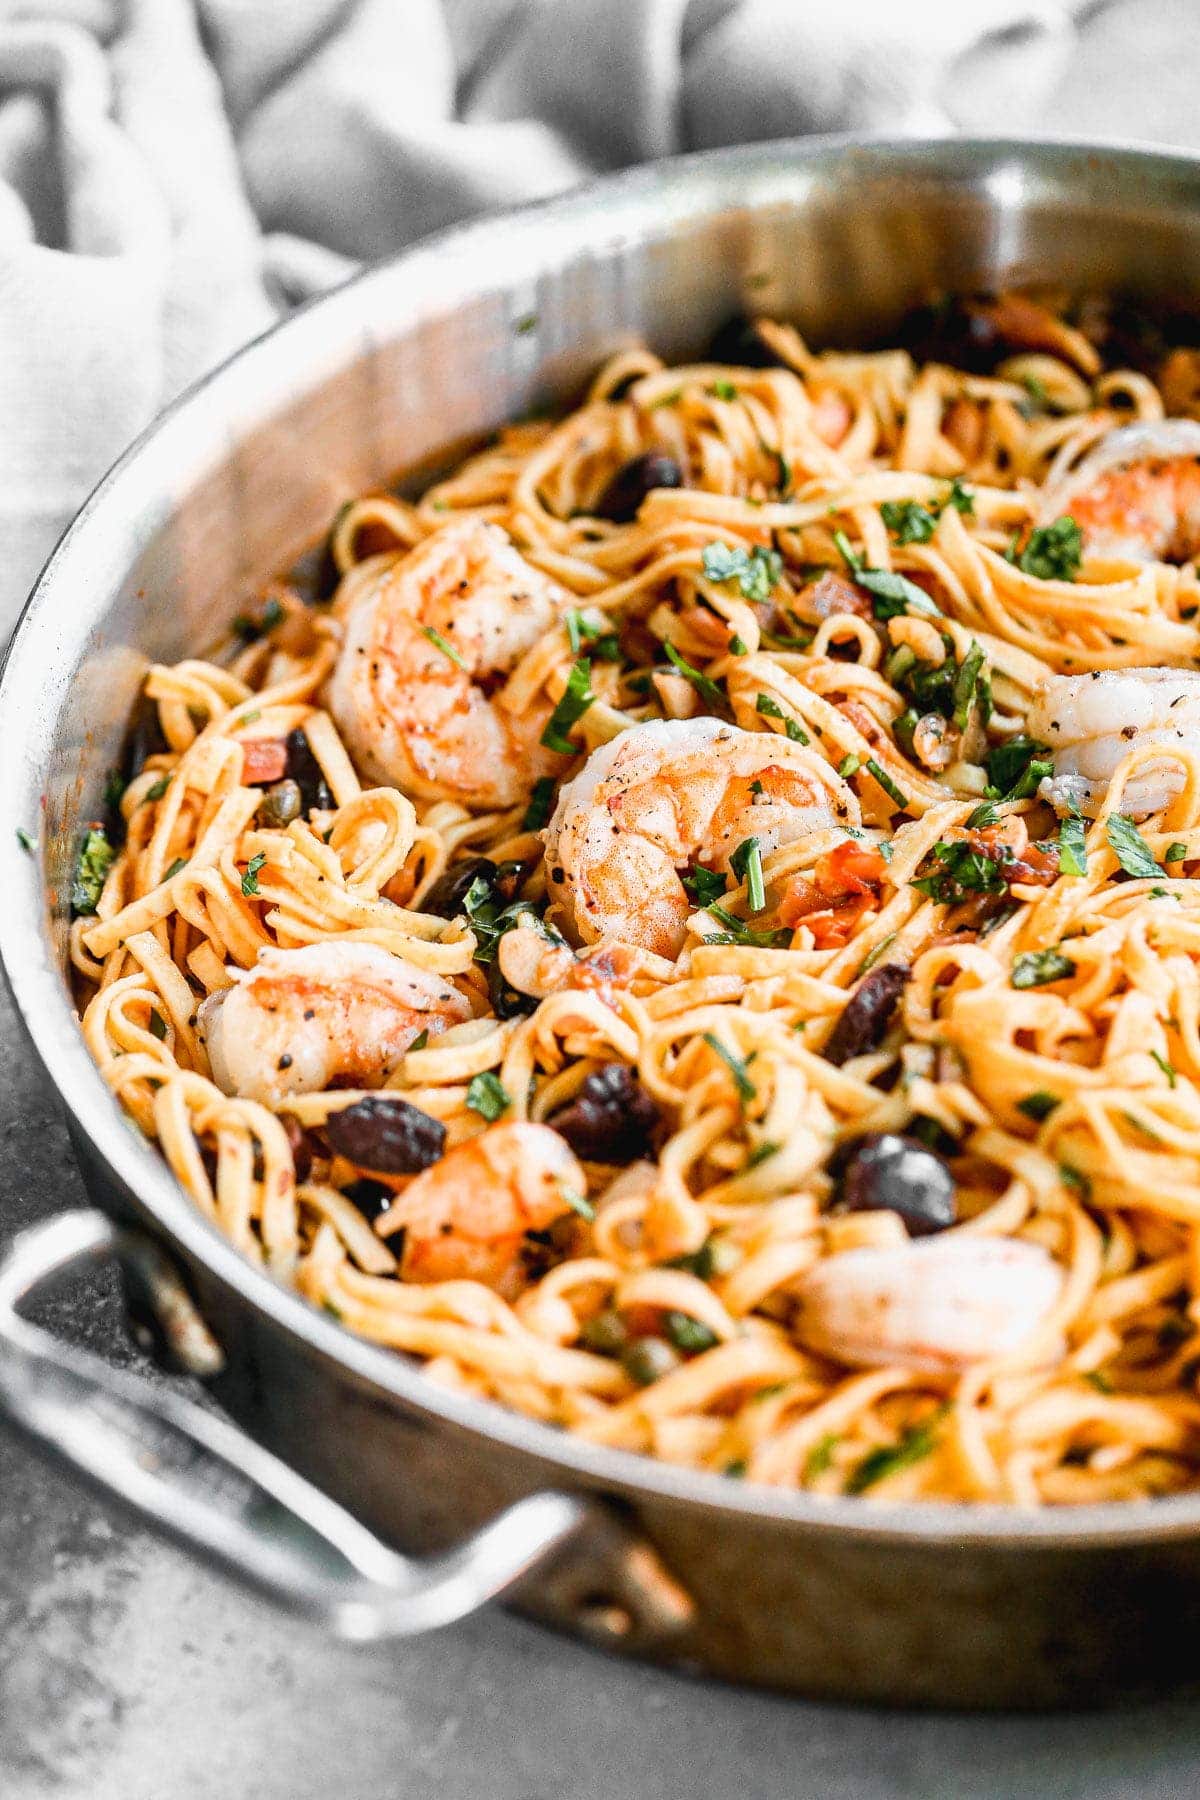 A classic pasta - shrimp puttanesca - showcases all the thing I love about the Mediterranean diet. Fresh linguine noodles are tossed with a impossibly simple tomato infused white wine sauce and studded with briny, salty capers and olives. With a heavy hand of garlic and a sprinkling of freshly grated parmesan cheese, this easy pasta dish manages to be utterly delicious and light and healthy at the same time.&nbsp;